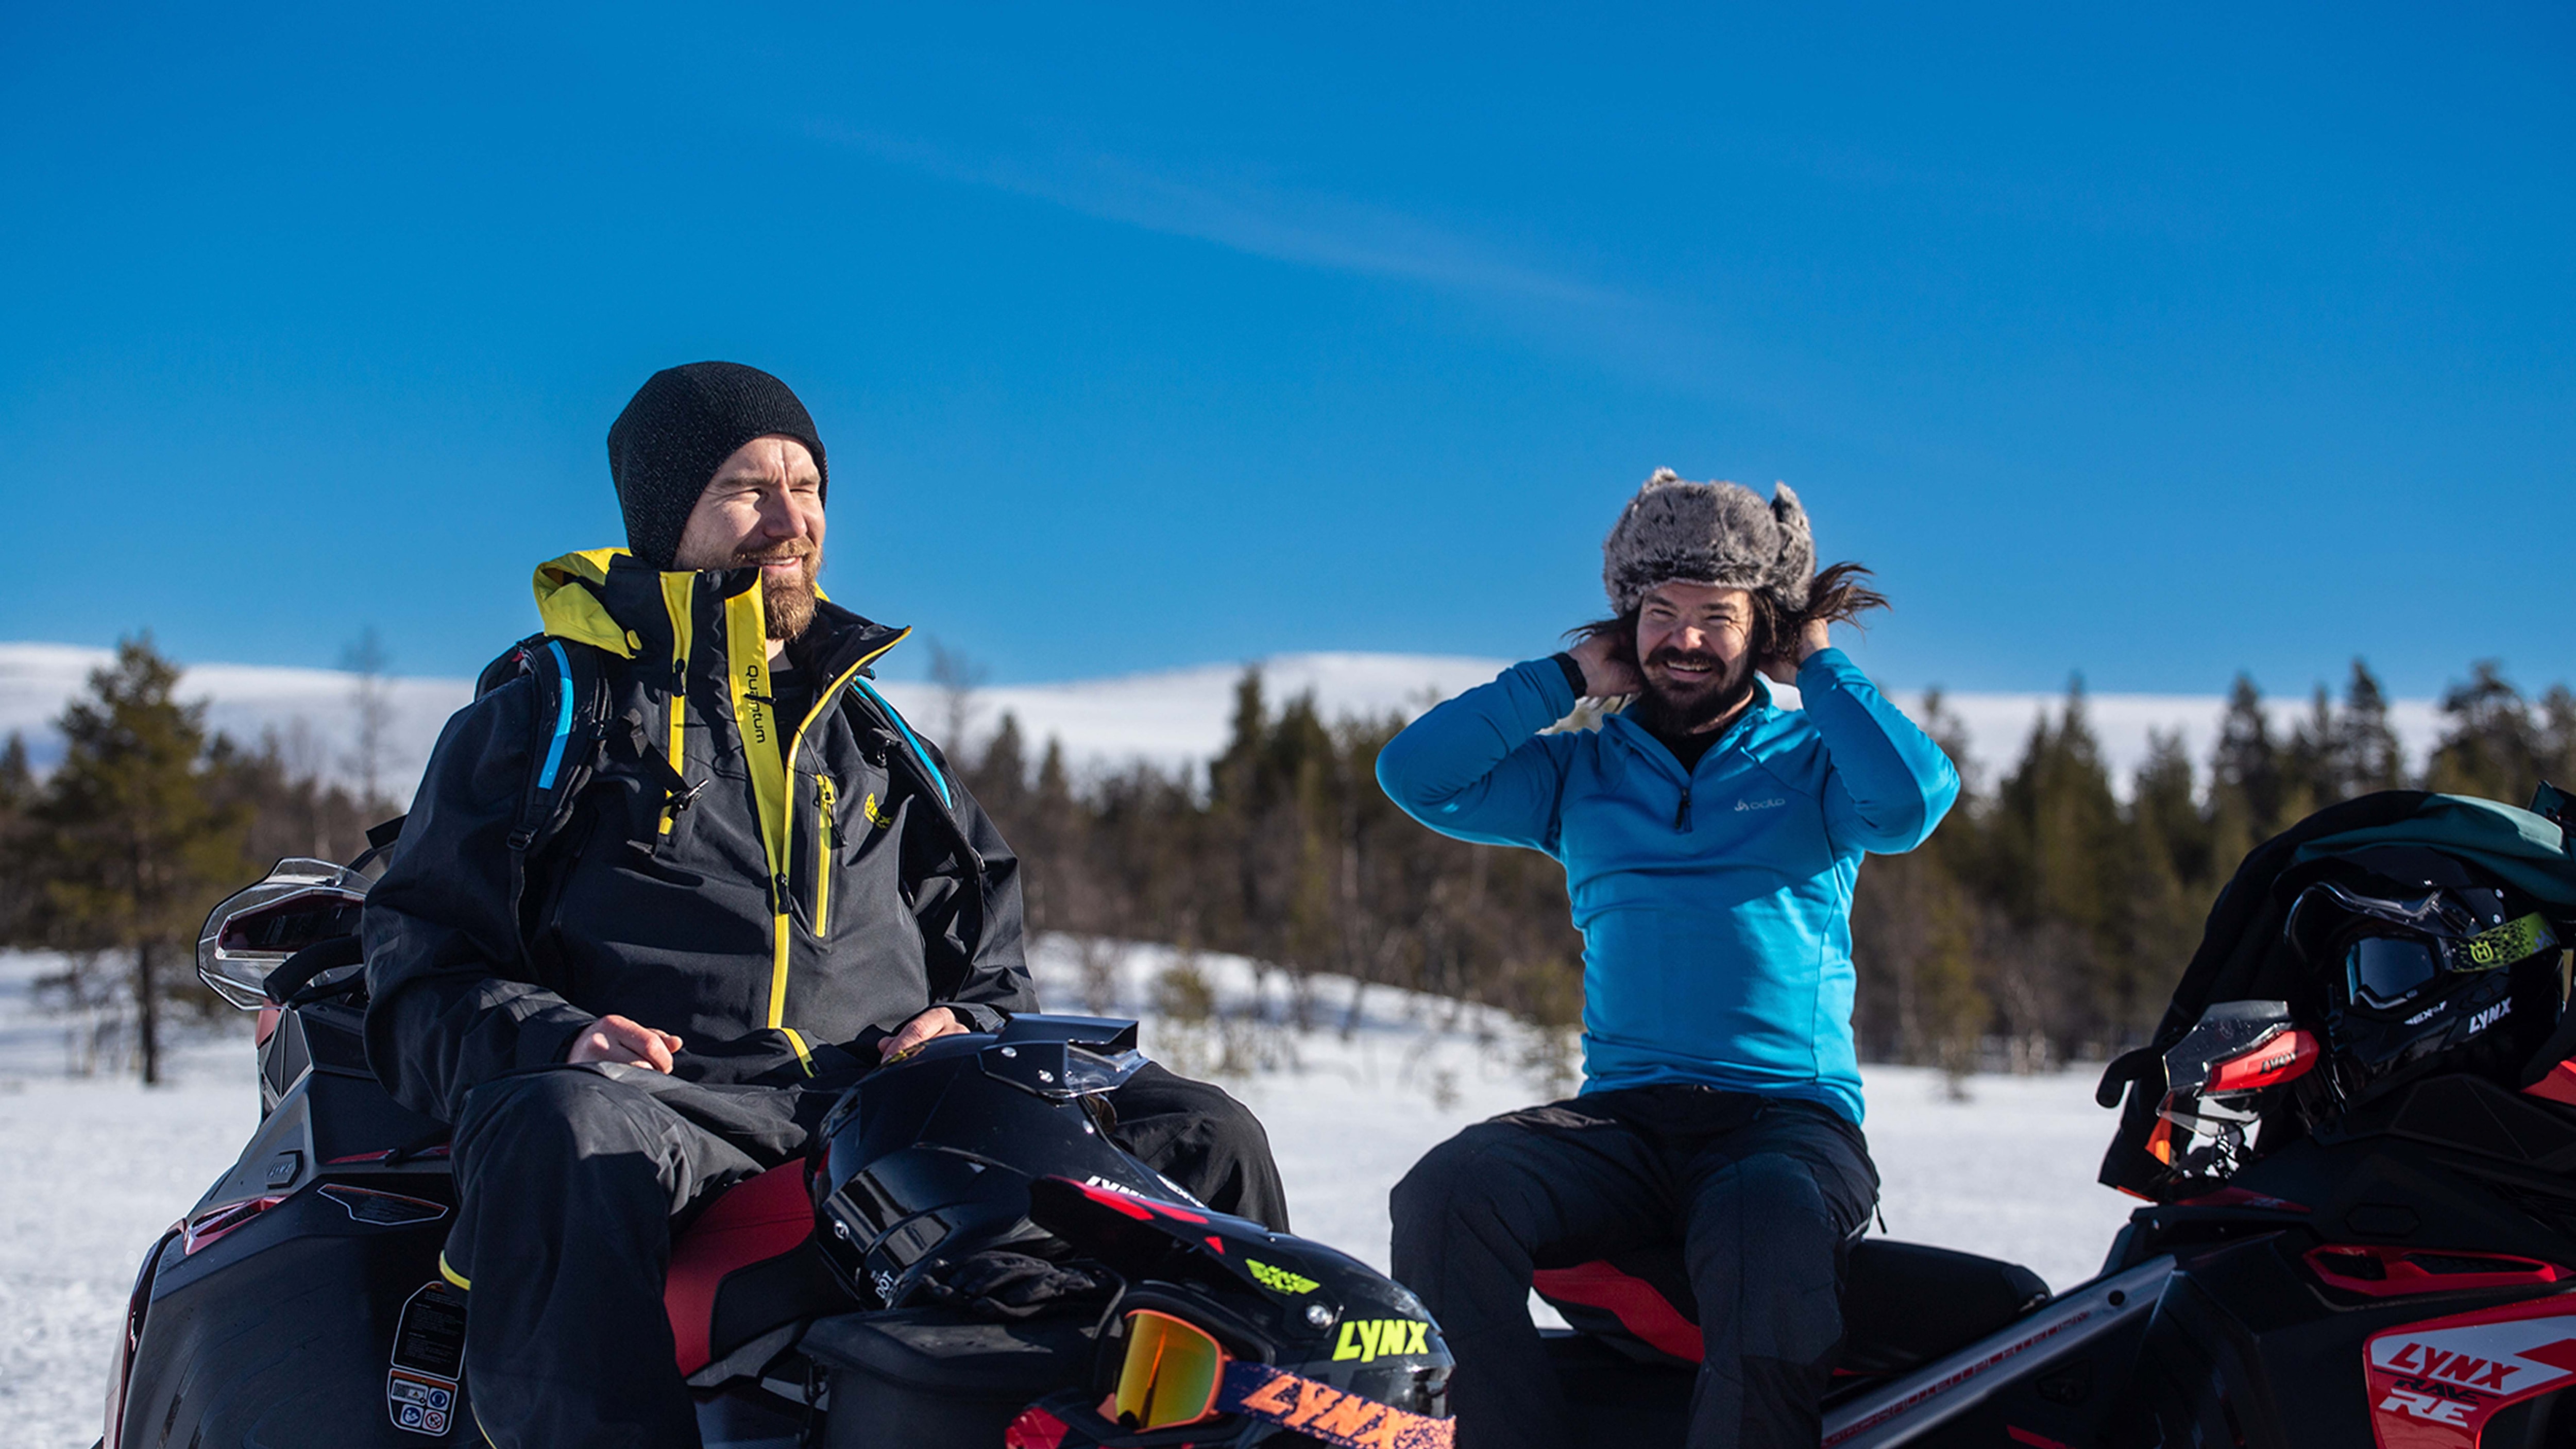 Janne Kaperi and Kaitsu Rinkinen from Biisonimafia chatting and laughing on snowmobiles